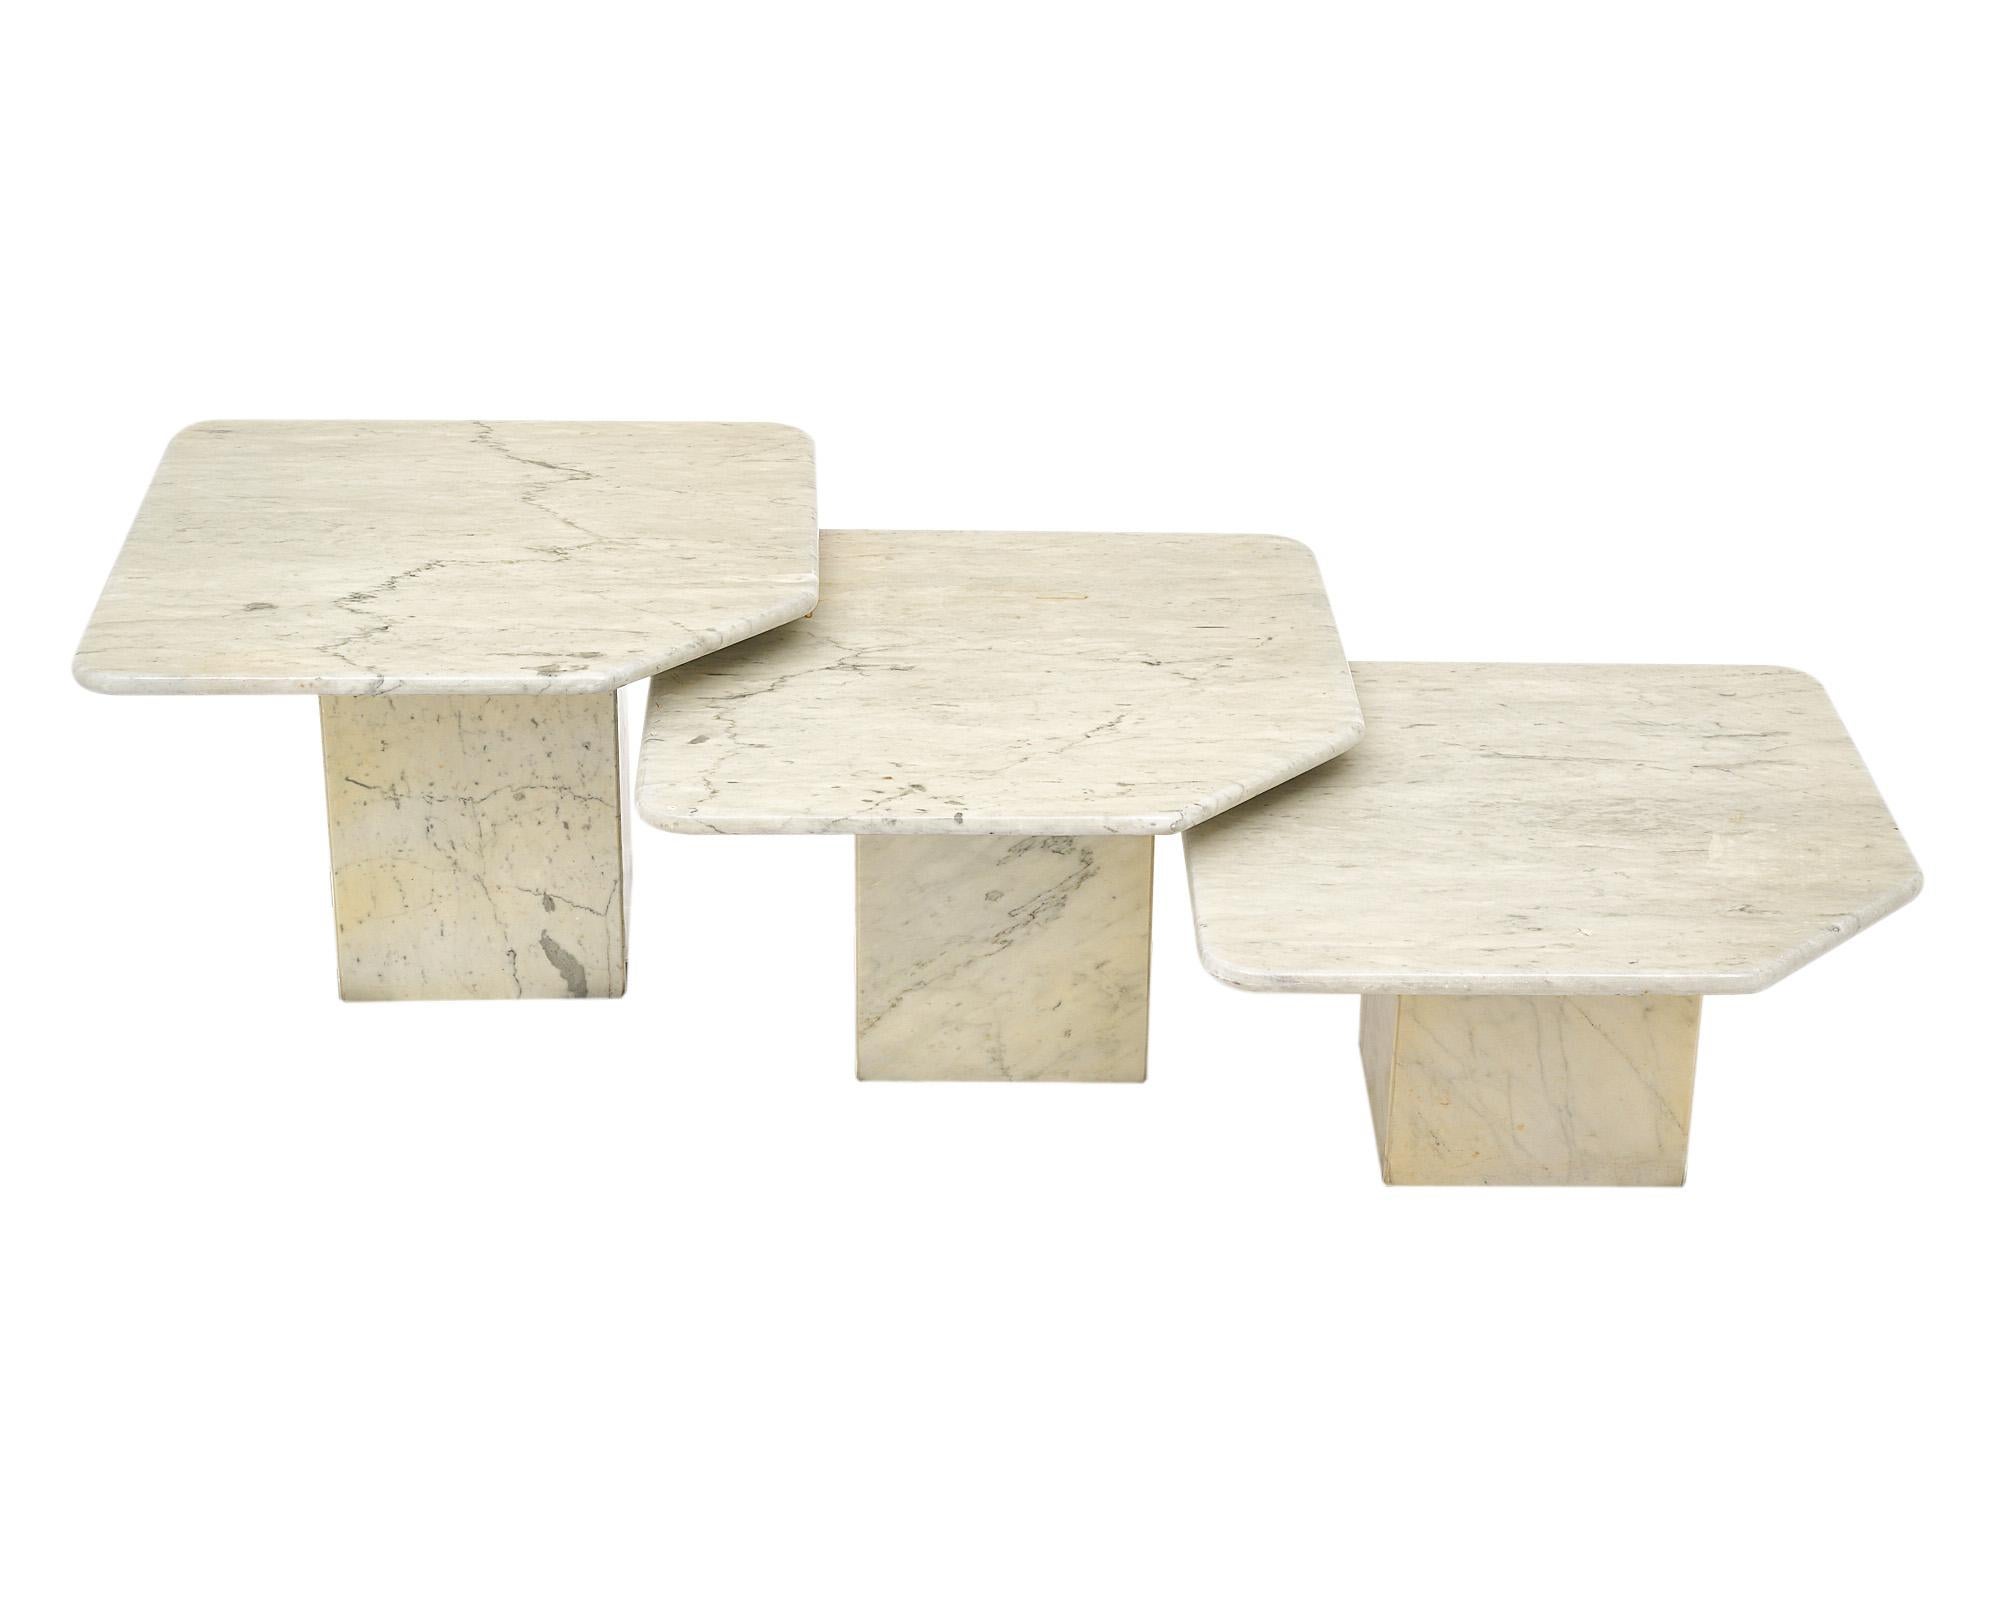 Set of three nesting tables made of Carrara marble. Each table sits on a square marble base. The marble tops are square in shape with rounded corners and each features a cut corner that is both graphic and creates functionality. We love the